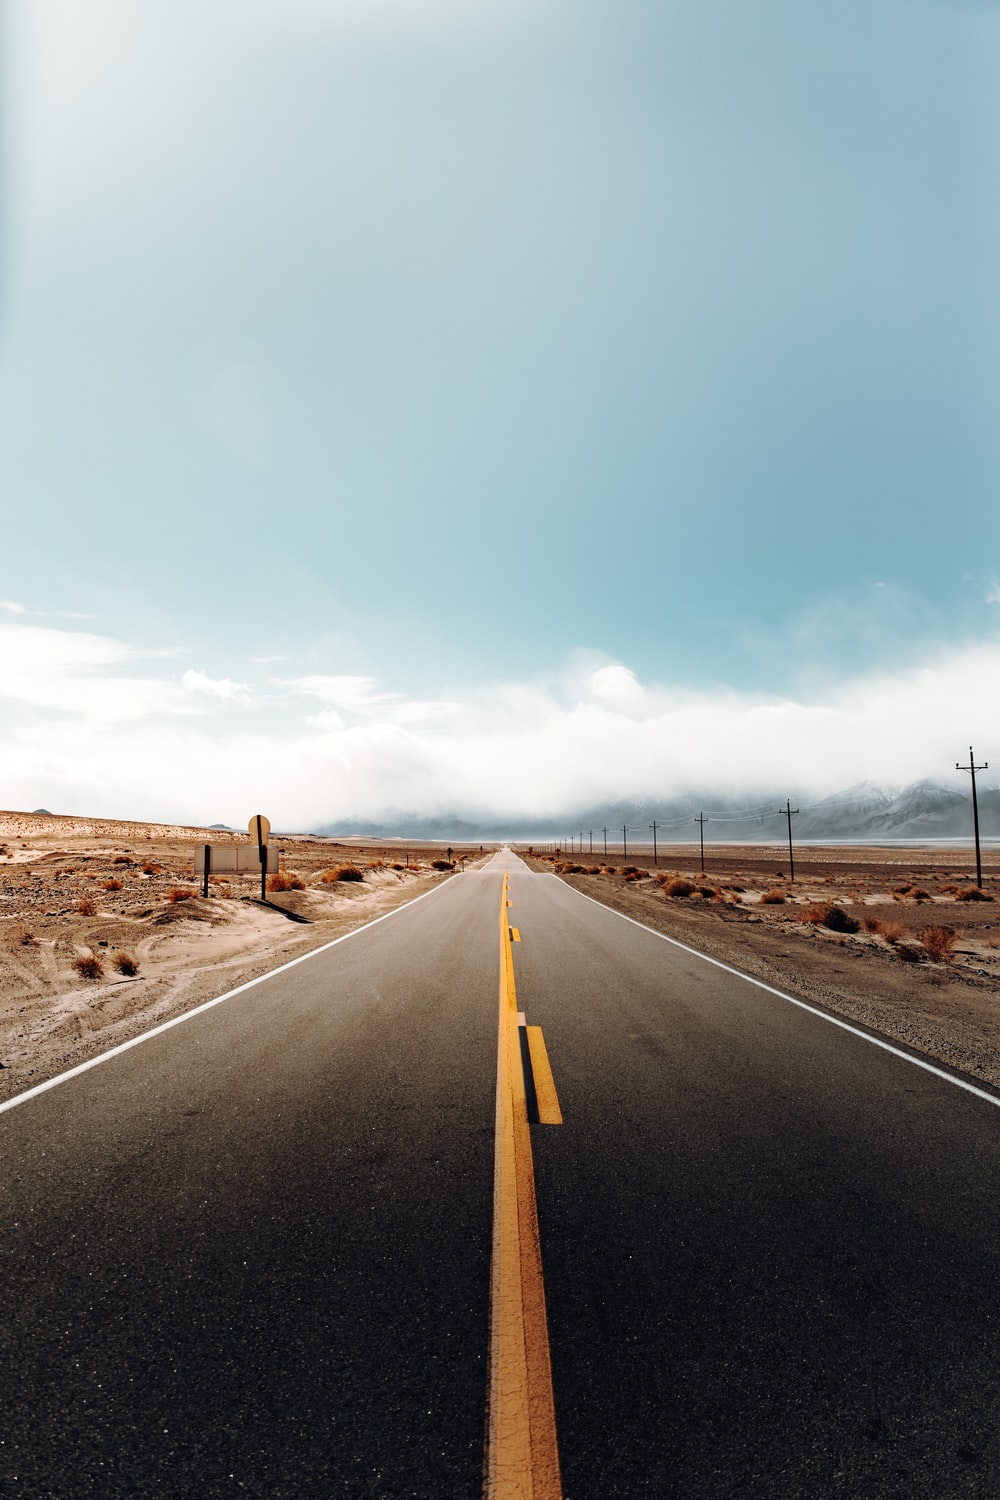 Endless Road Picture. Download Free Image